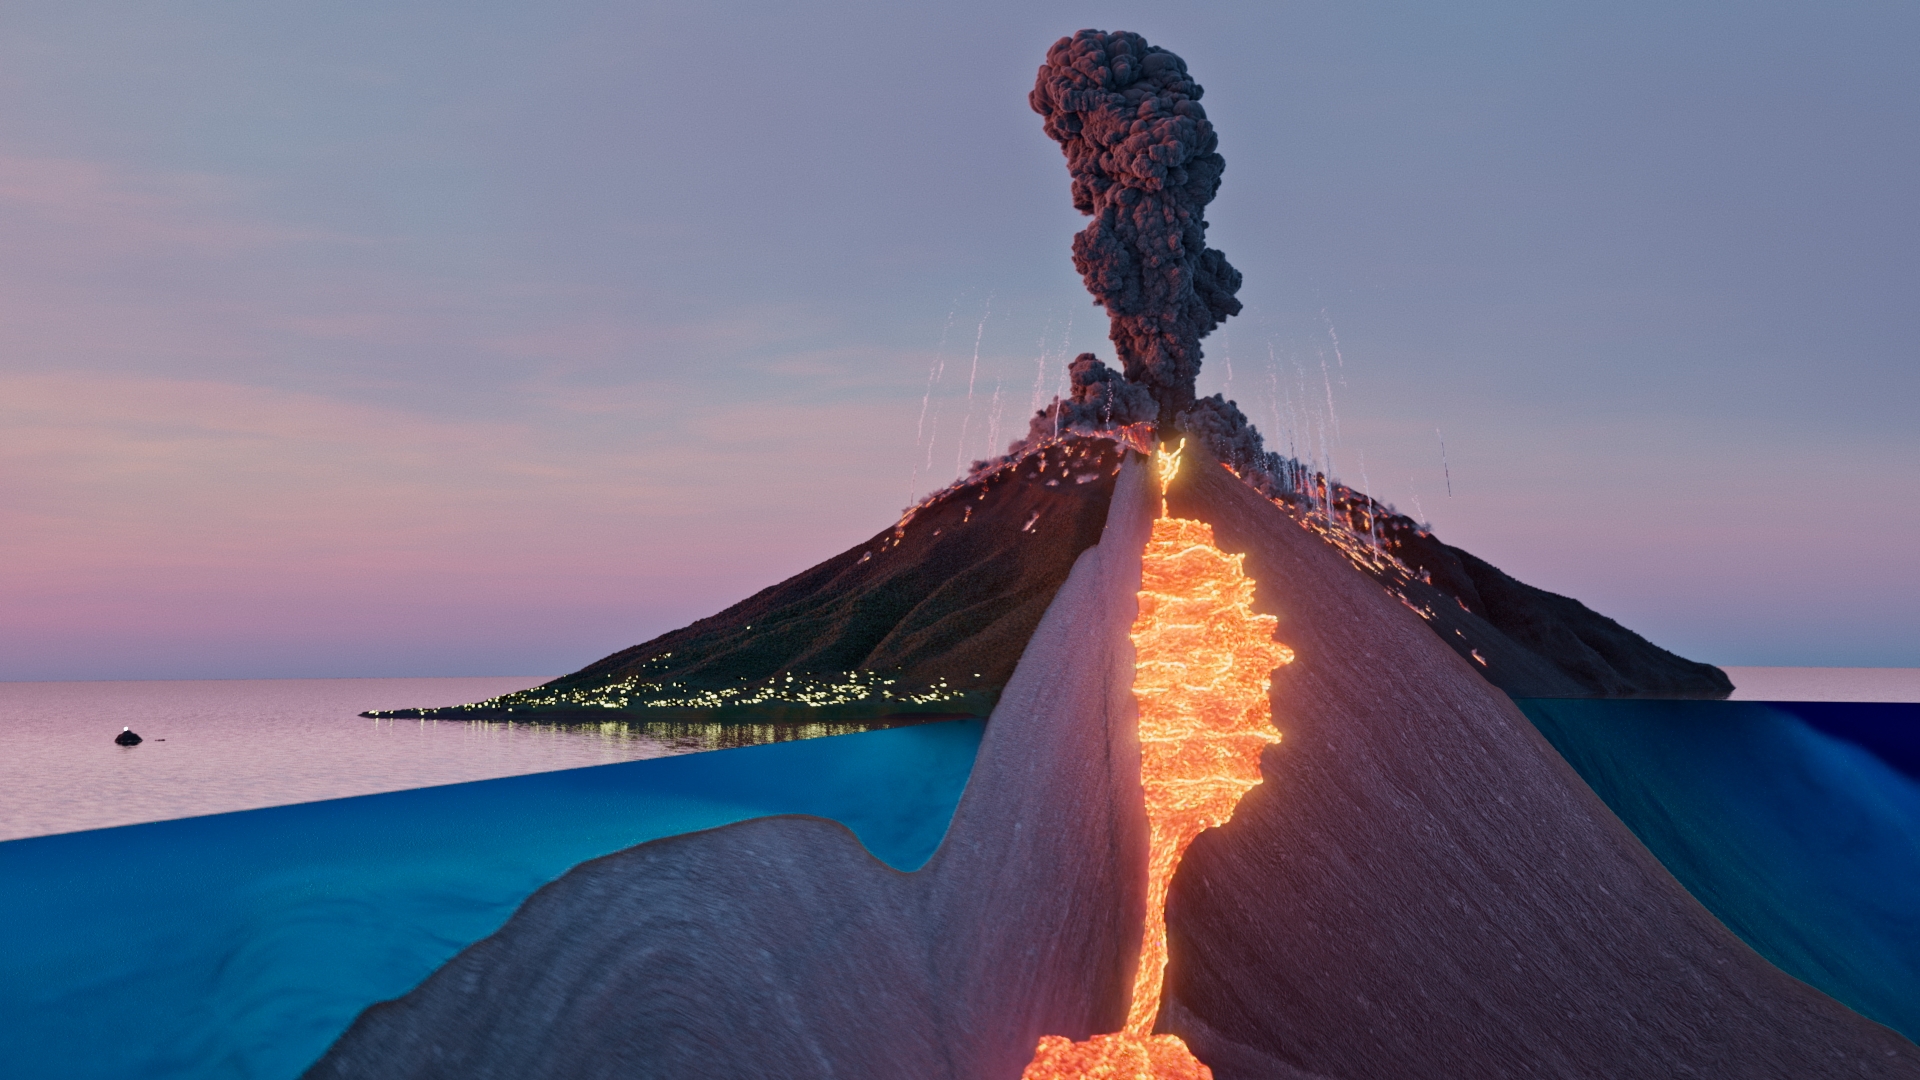 The 3D animation begins on the bow of a yacht, a volcanic island is visible in the mid-distance. A large volcanic eruption begins. Ash and glowing rock fragments are thrown hight into the air. After a couple of seconds, the shock waves arrives at the boat, shaking the camera with a massive deep boom. The camera then transits to a cutaway view of the geology, revealing the inner workings of the volcano. The strata are visible, as well as the internal magma chambers.